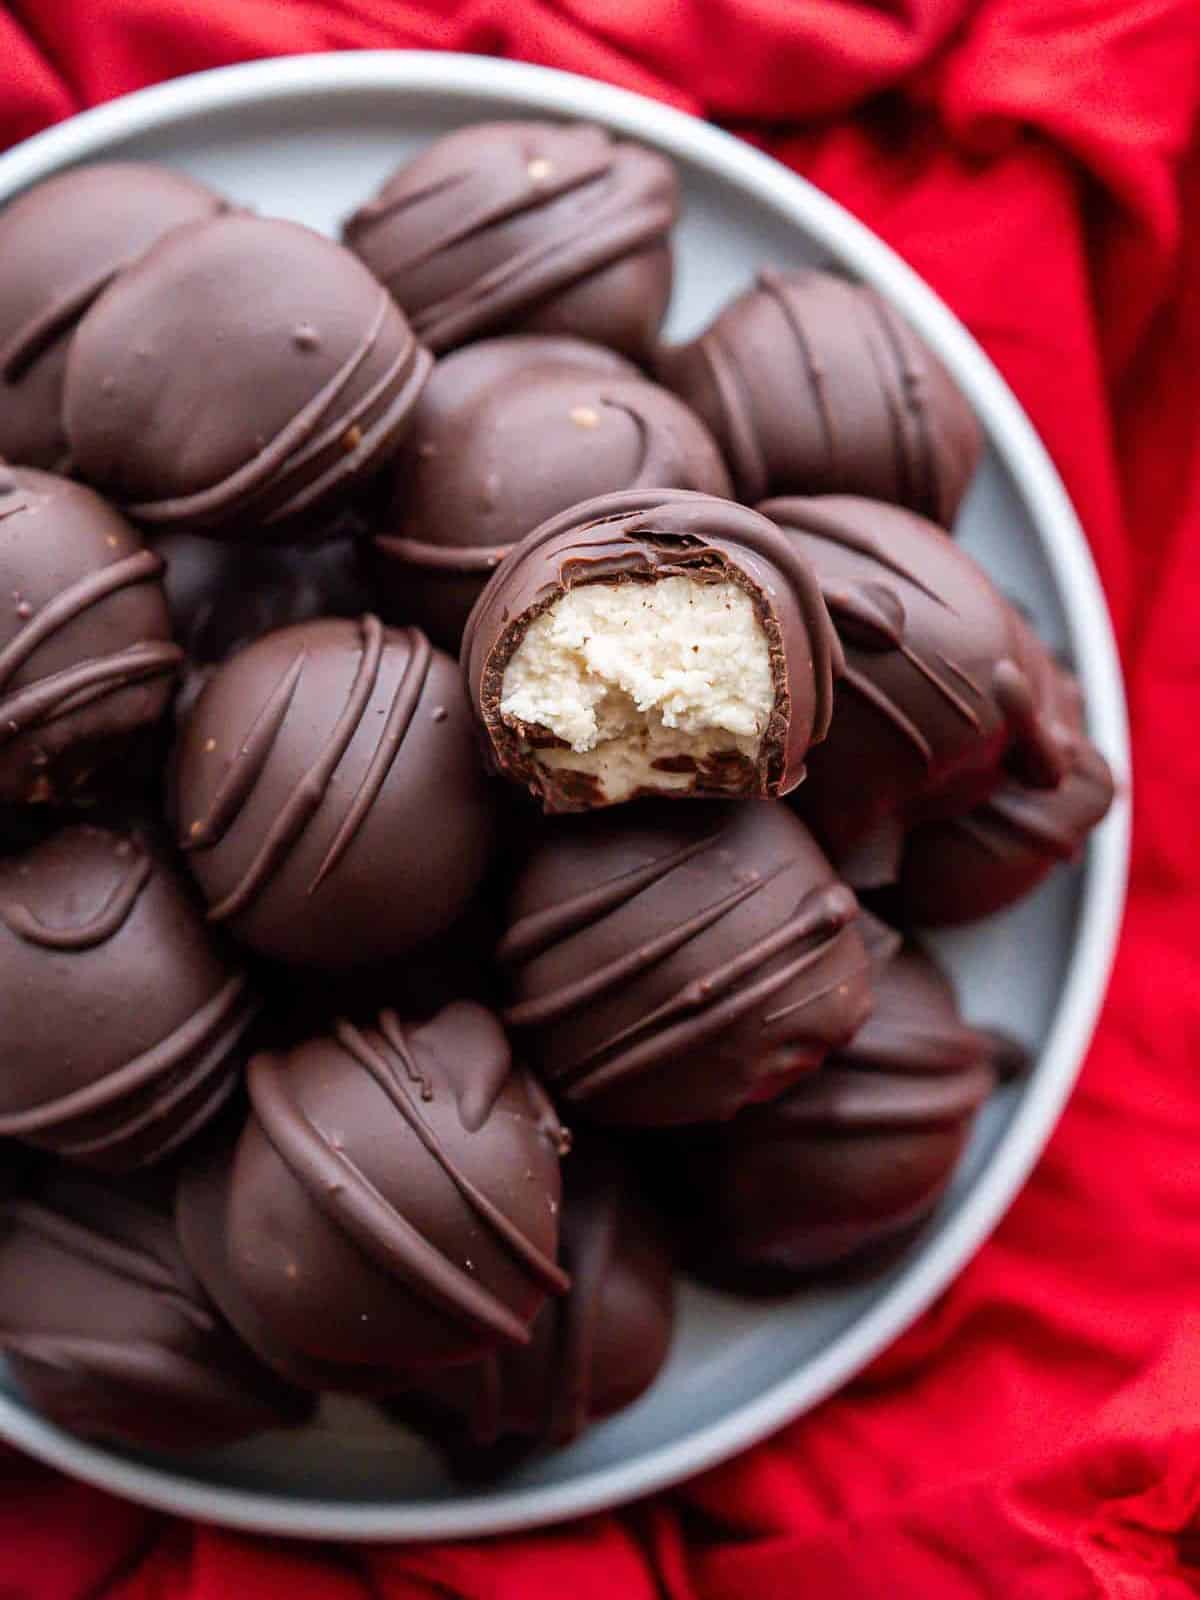 decadent chocolate truffles with a creamy maple buttercream filling.